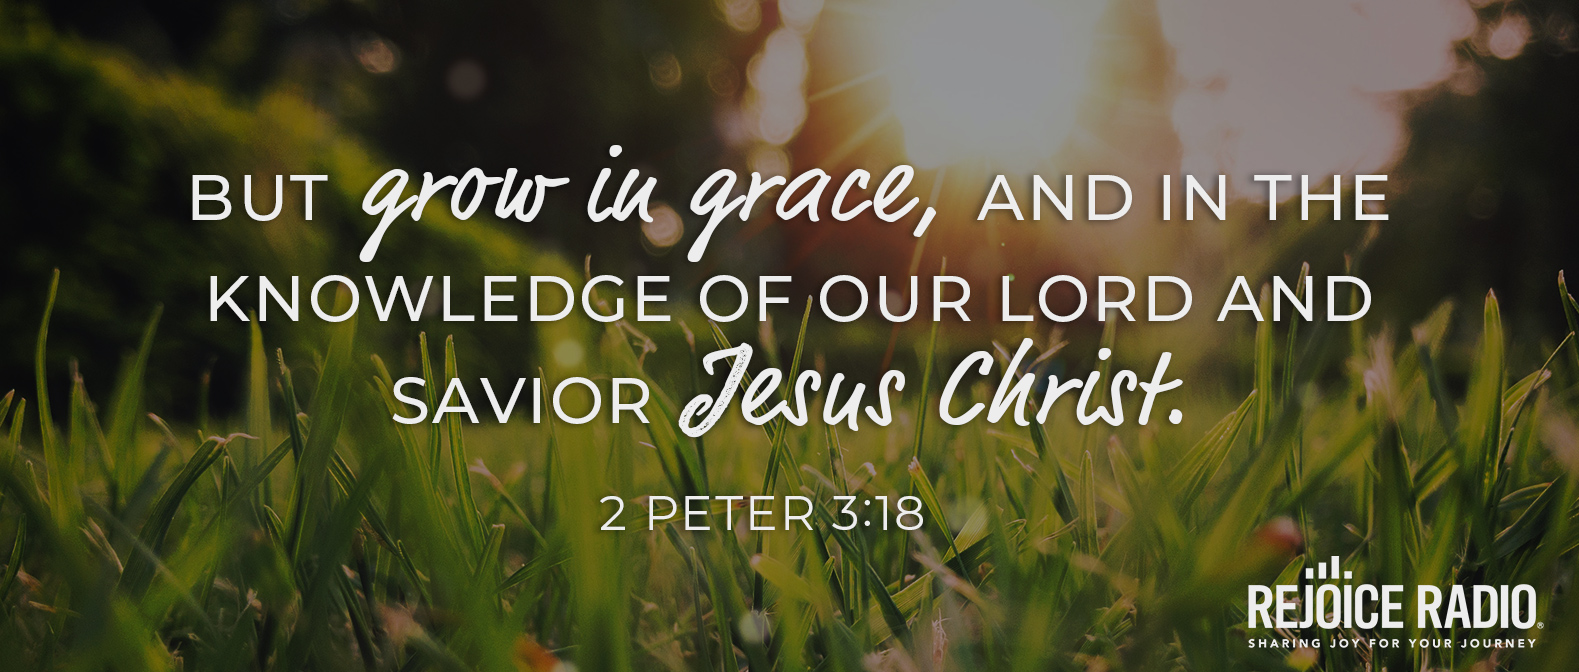 March 1-31 verse slider - But grow in grace, and in the knowledge of our Lord and Savior Jesus Christ.